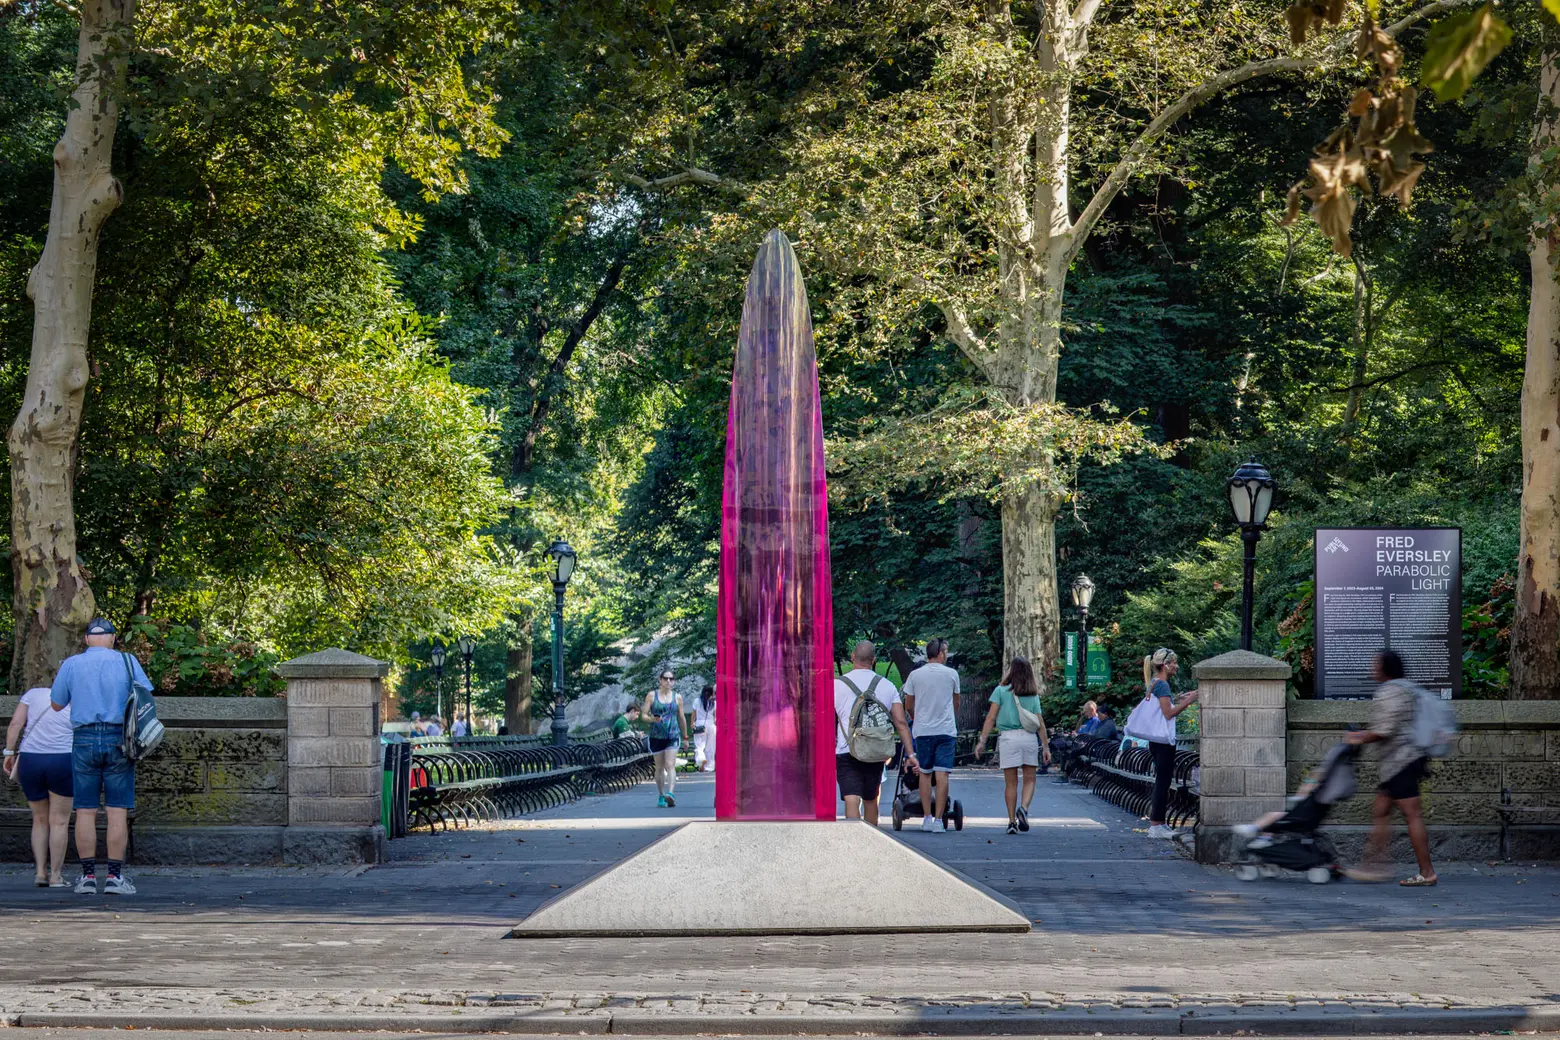 Fred Eversley’s first public artwork in NYC explores new dimensions in Central Park